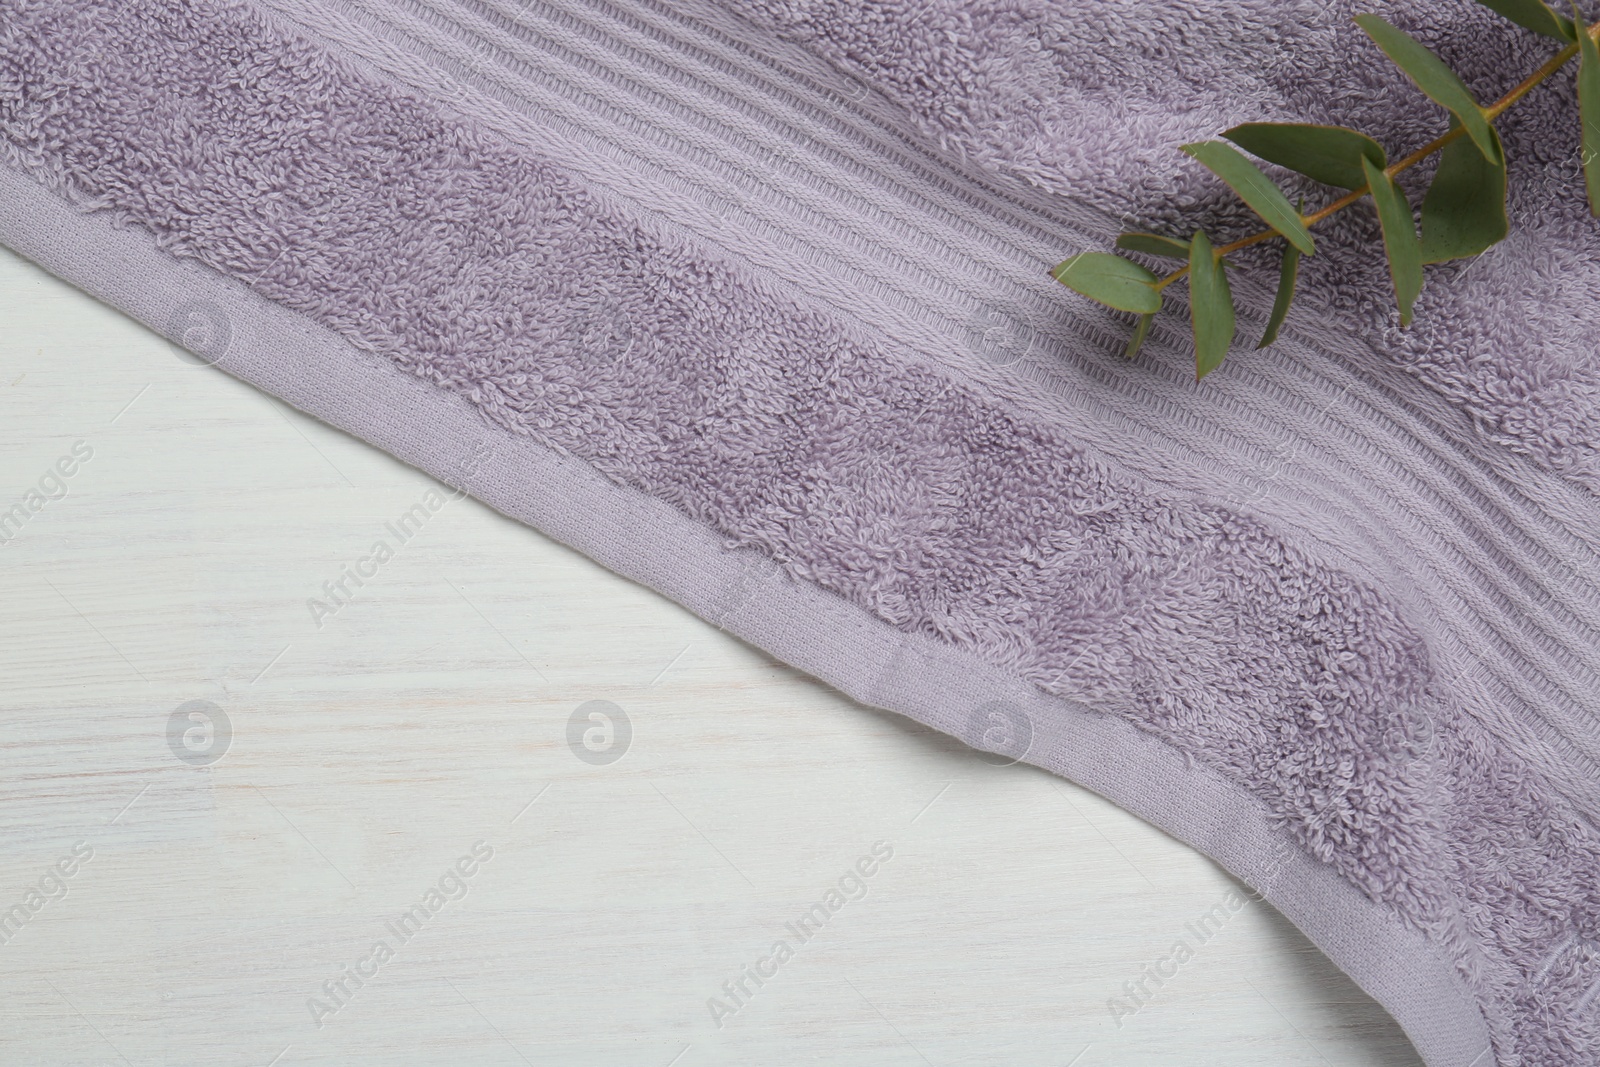 Photo of Violet terry towel and eucalyptus branch on light wooden table, top view. Space for text